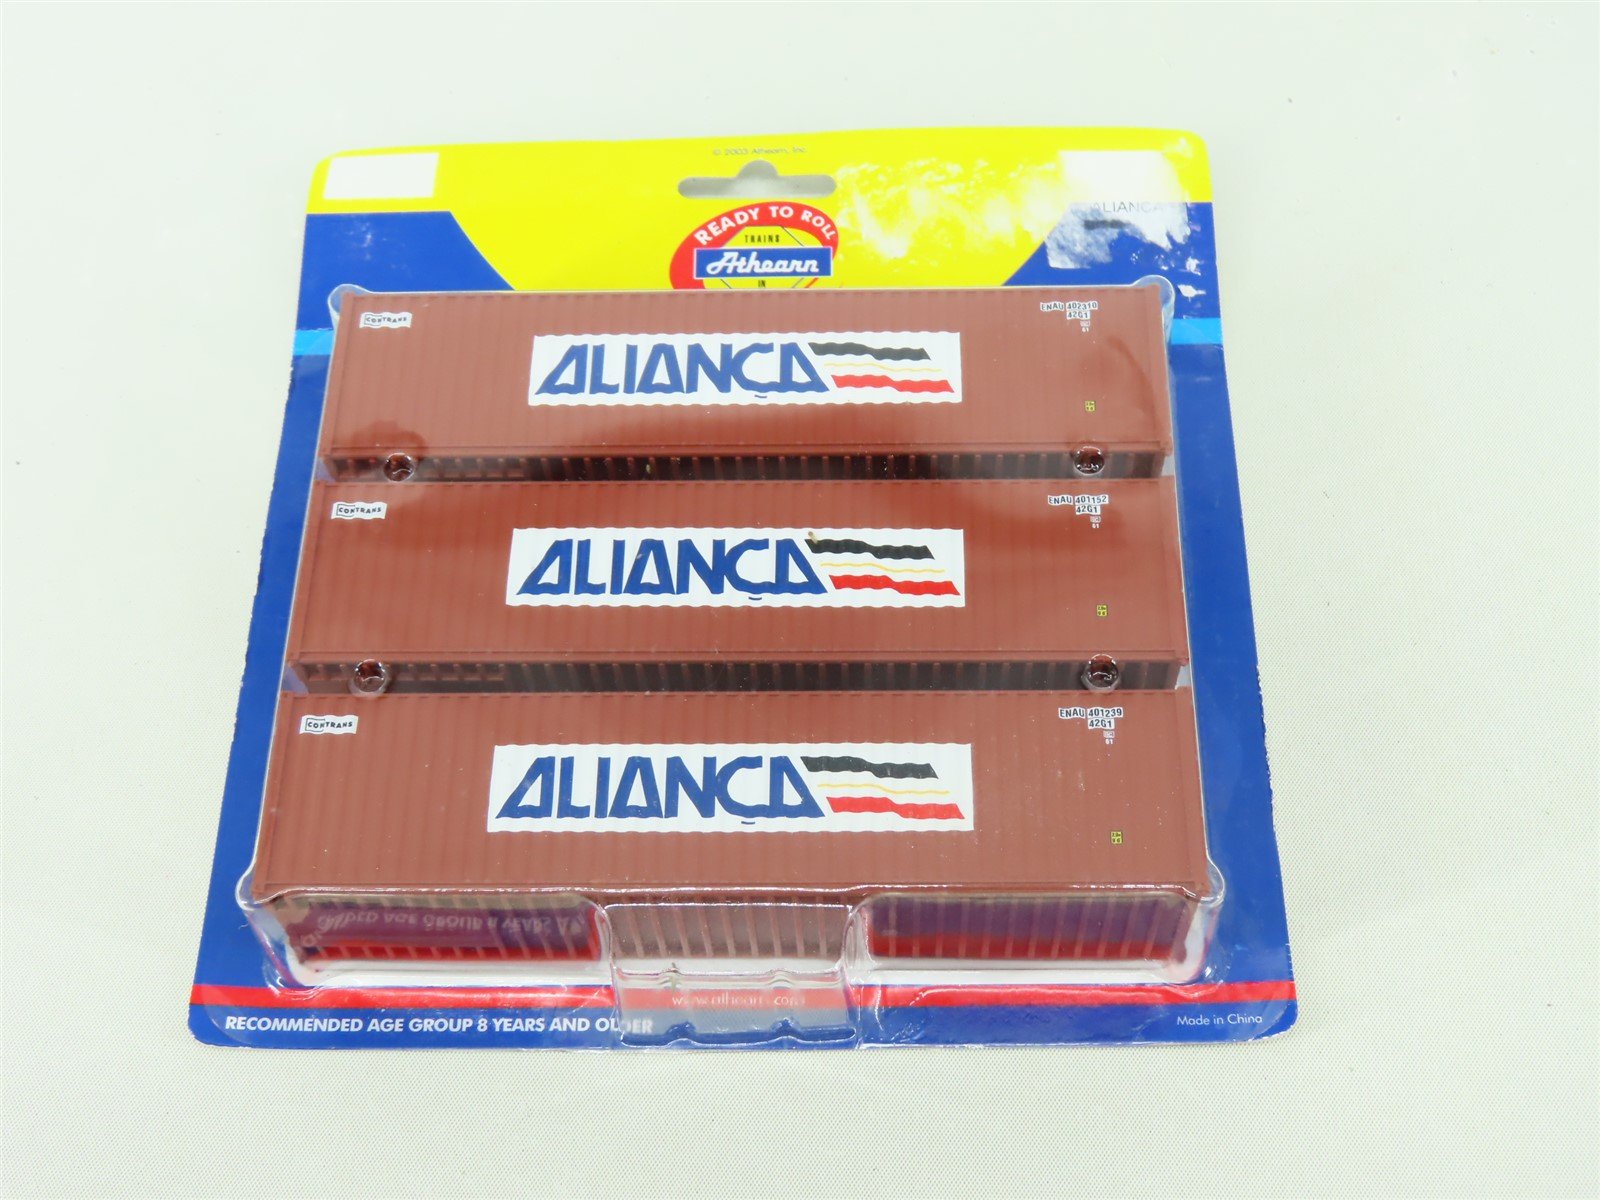 HO 1/87 Scale Athearn 2811 ALIANCA 40' Corrugated "Dry Box" Container 3-Pack